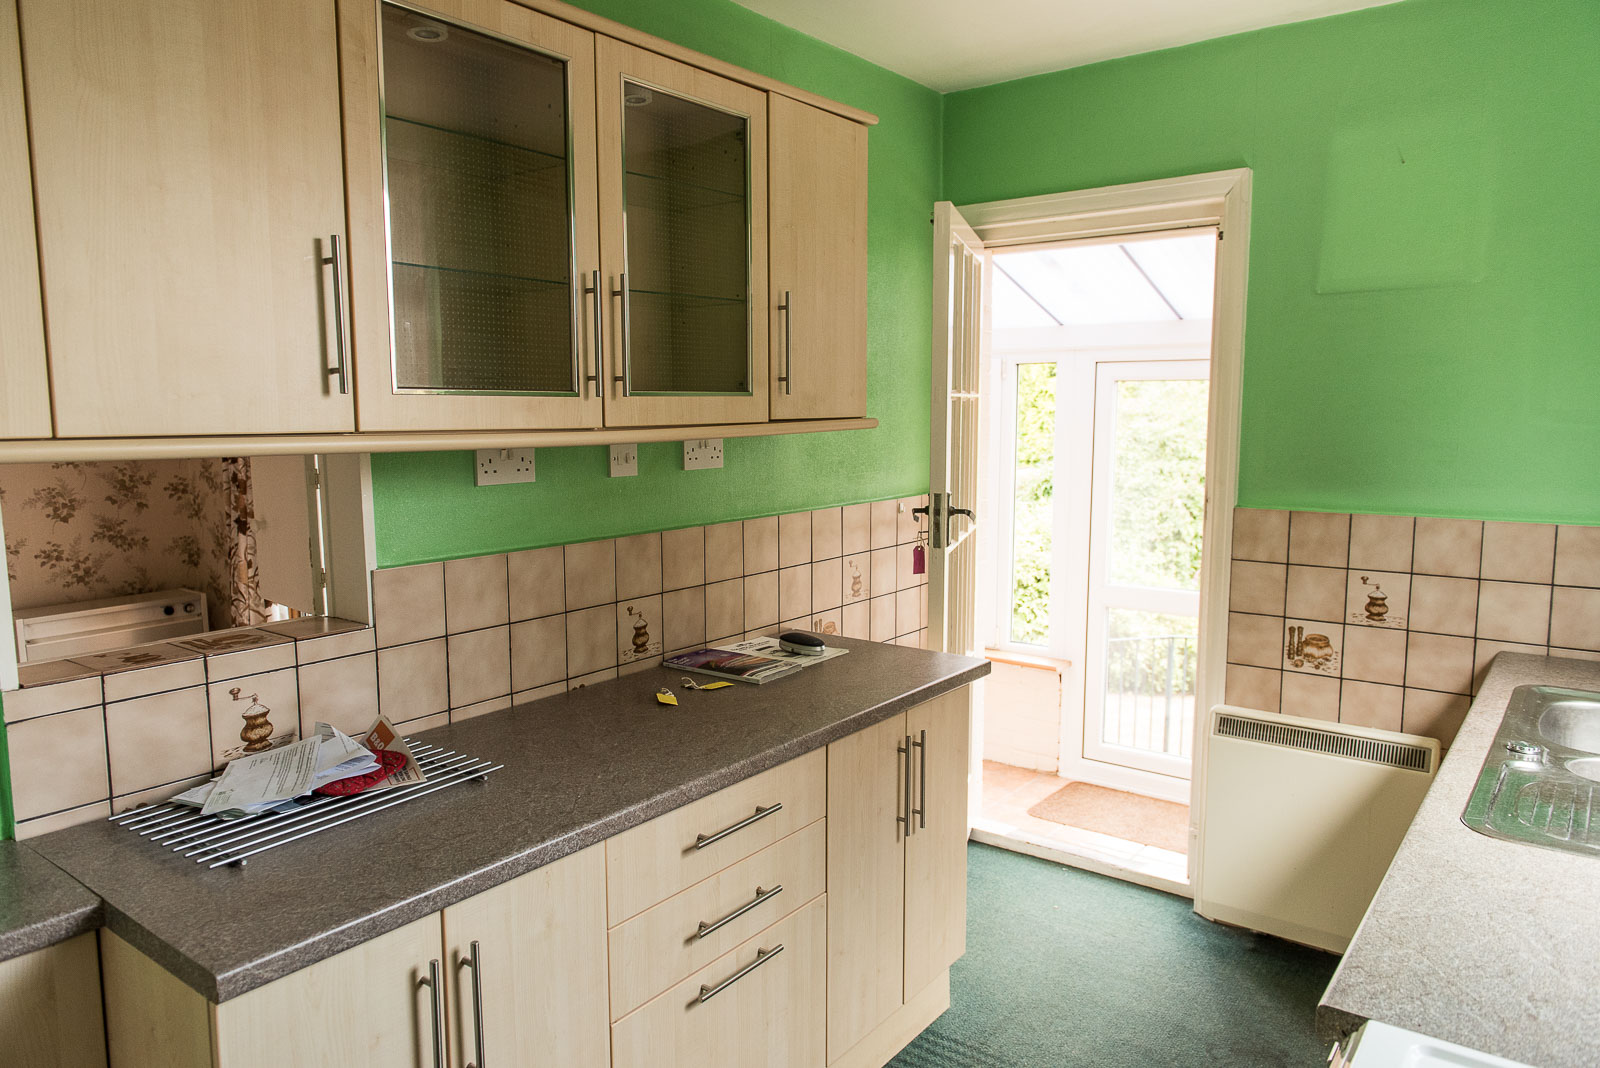 1930s semi - NEWISH KITCHEN WITH ANCIENT TILES &amp; A POP OF APPLE GREEN. FAB COMBO.